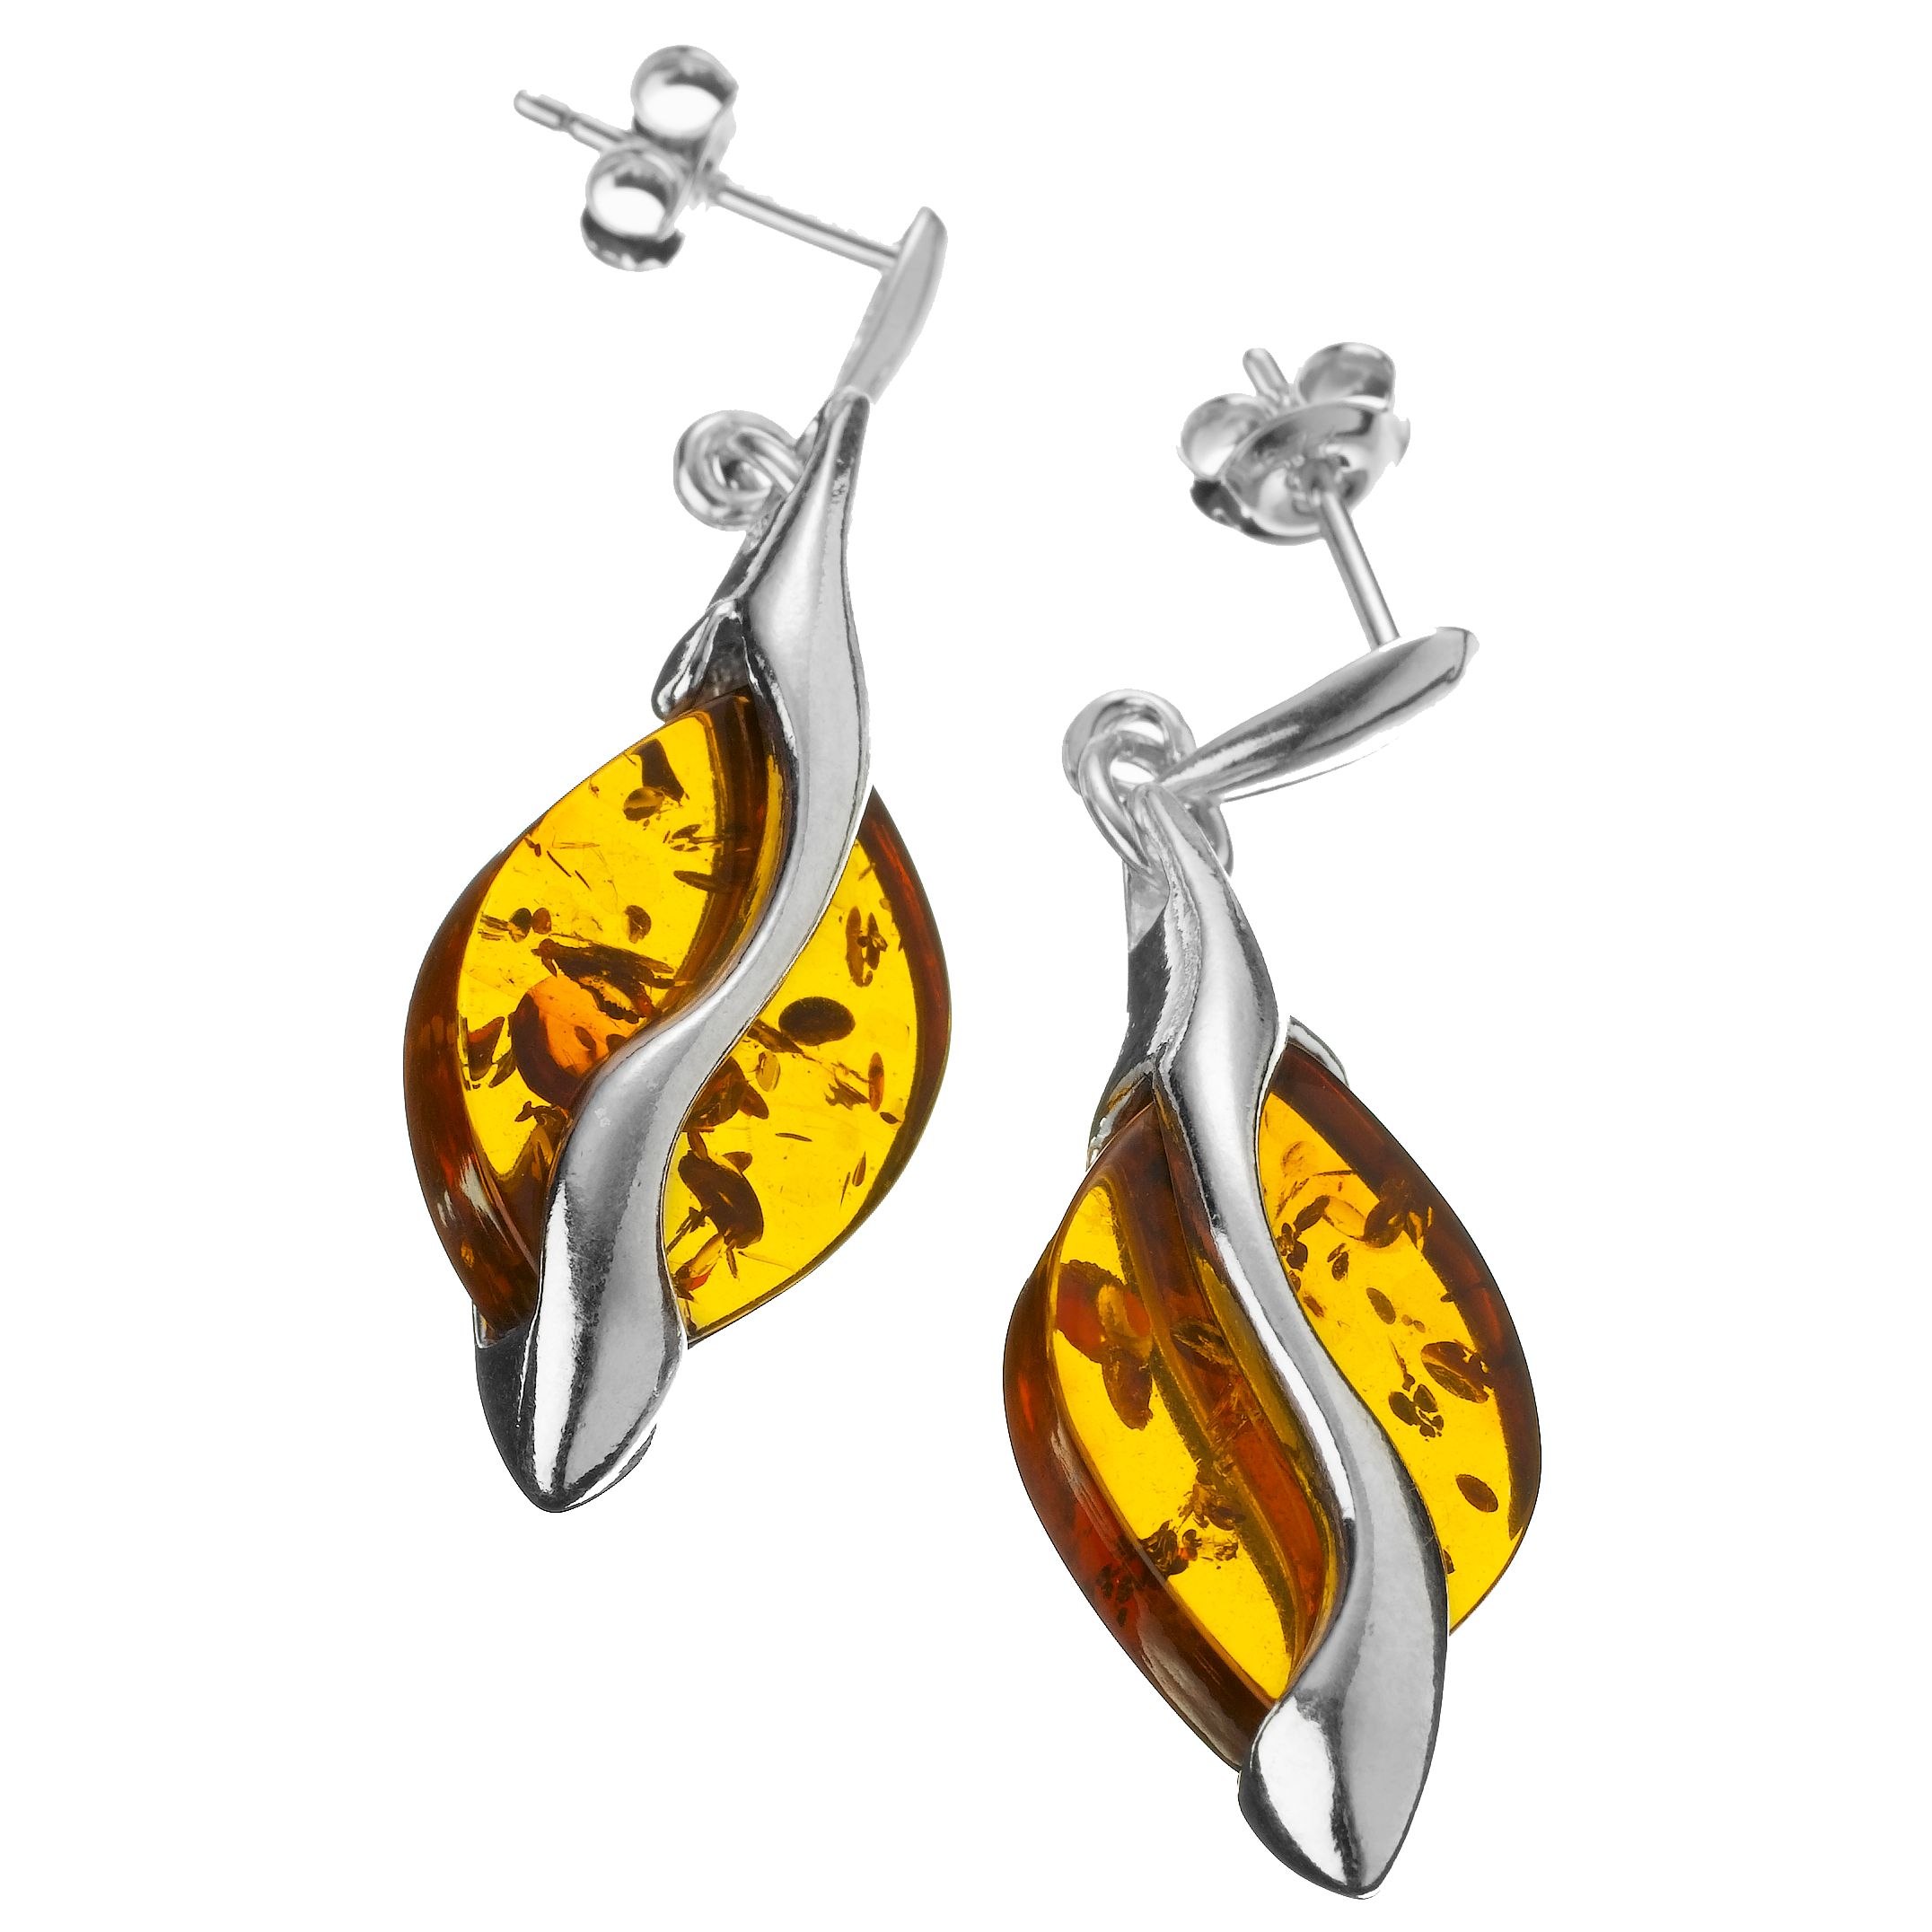 Amber and Silver Drop Earrings